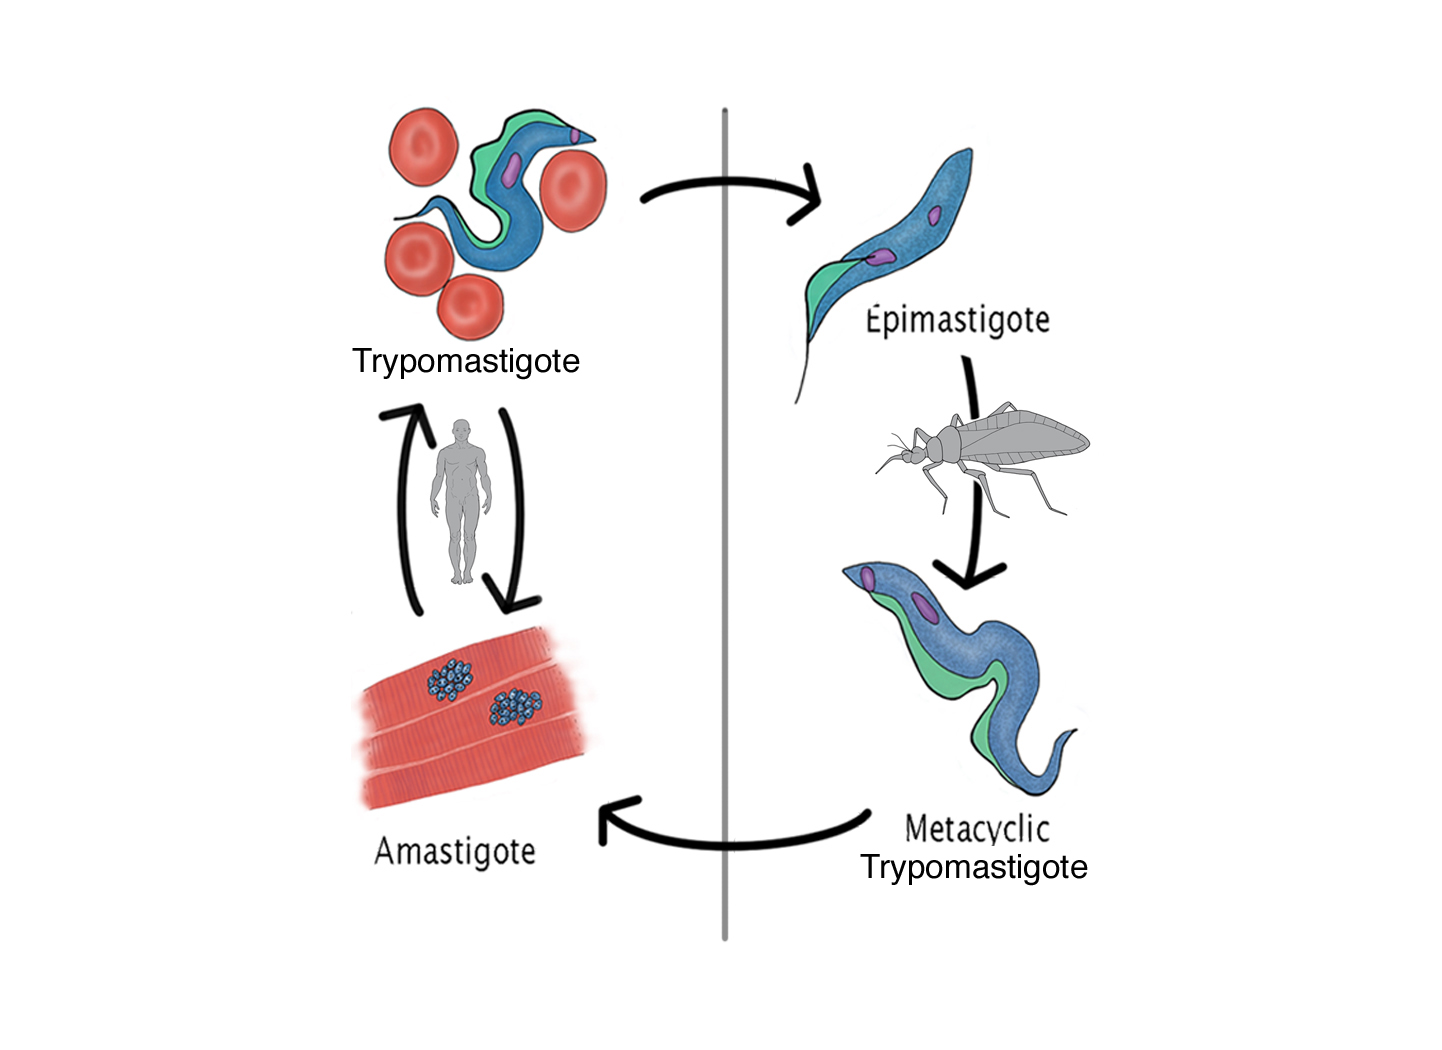 trypanosome life cycle